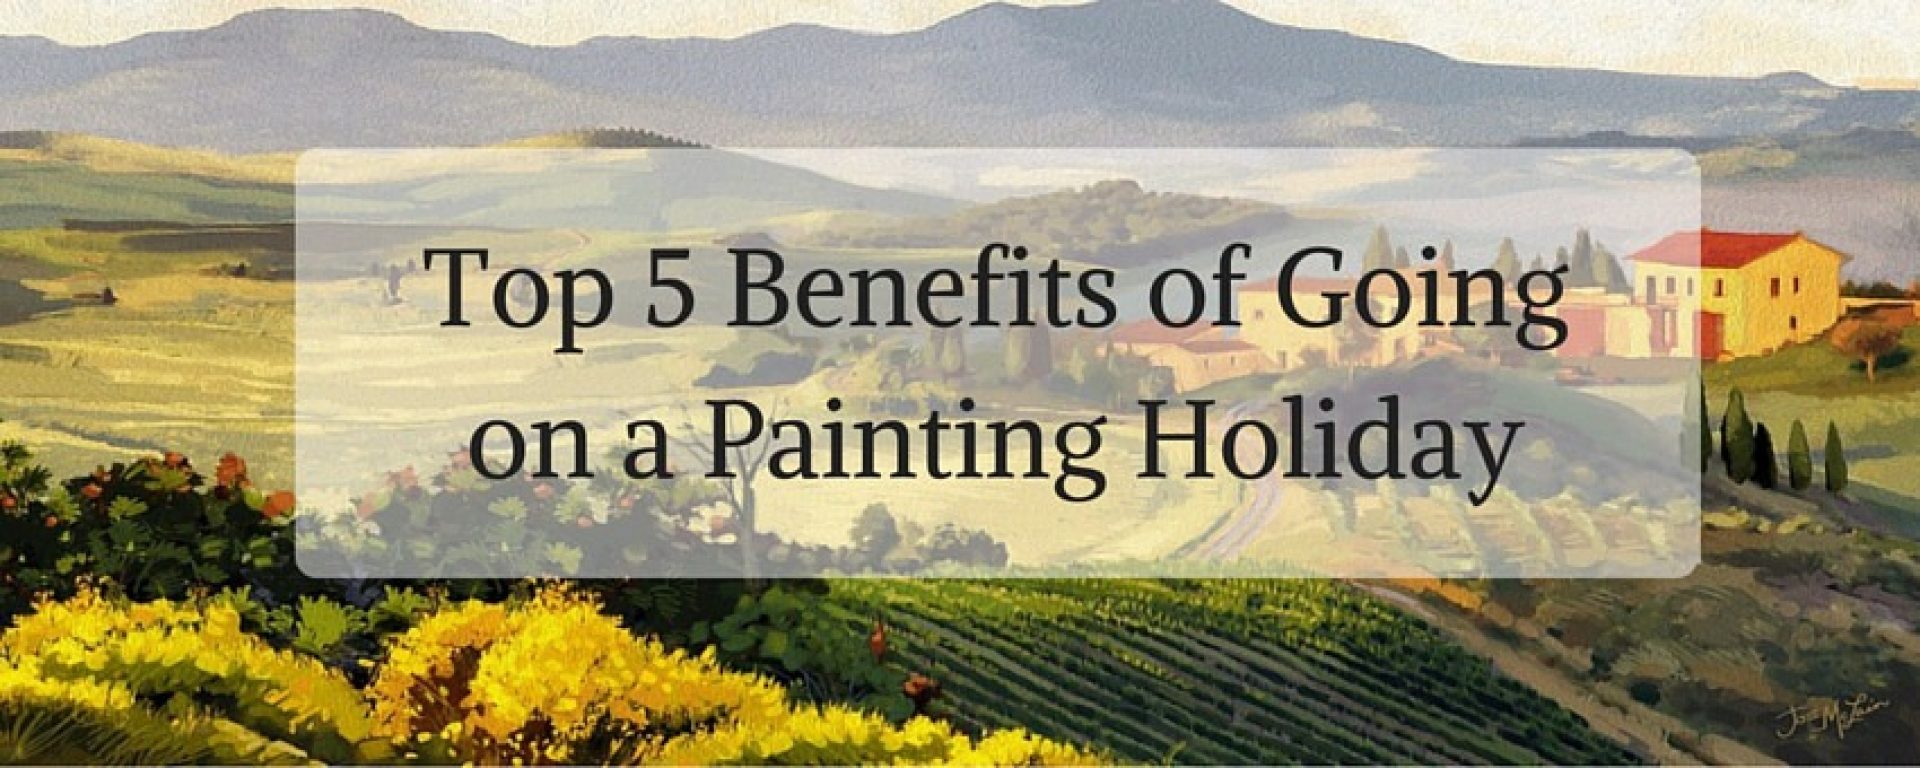 Top 5 Benefits Of Going On A Painting Holiday Flavours Holidays